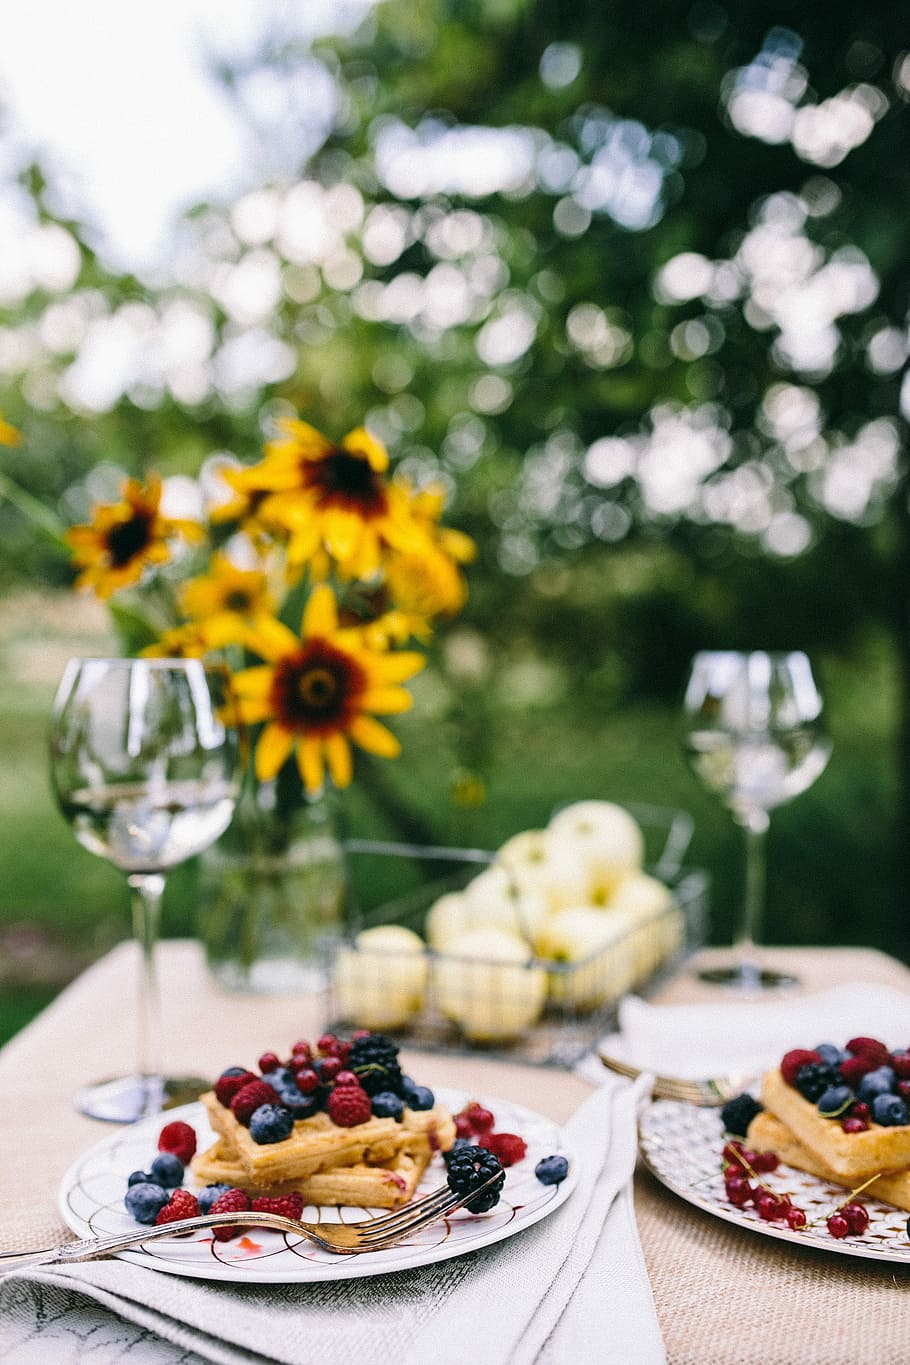 Healthy lunch in the garden, summer, flower, flowers, table, relax